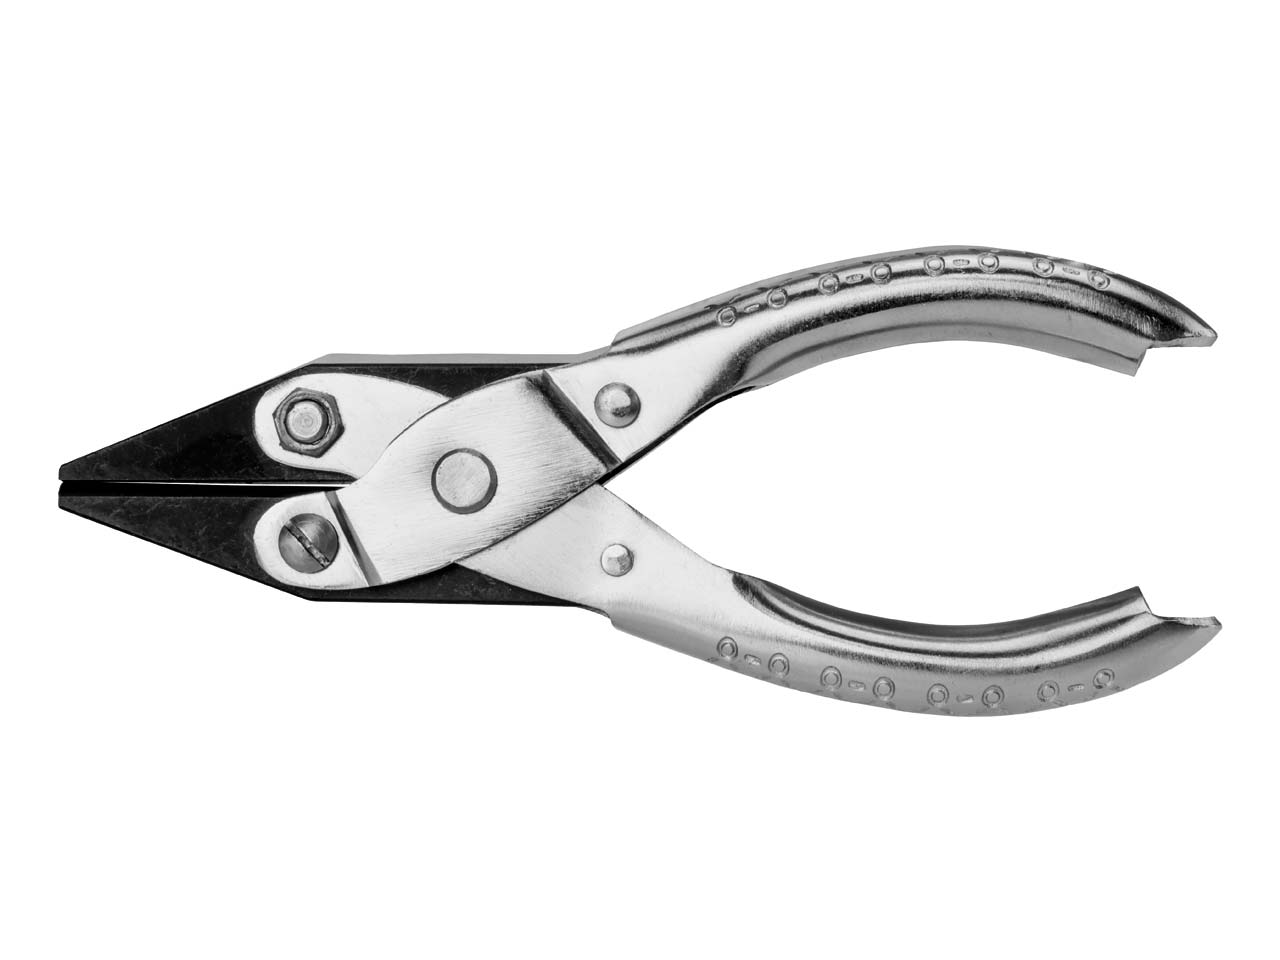 What are Classic Parallel Action Pliers?